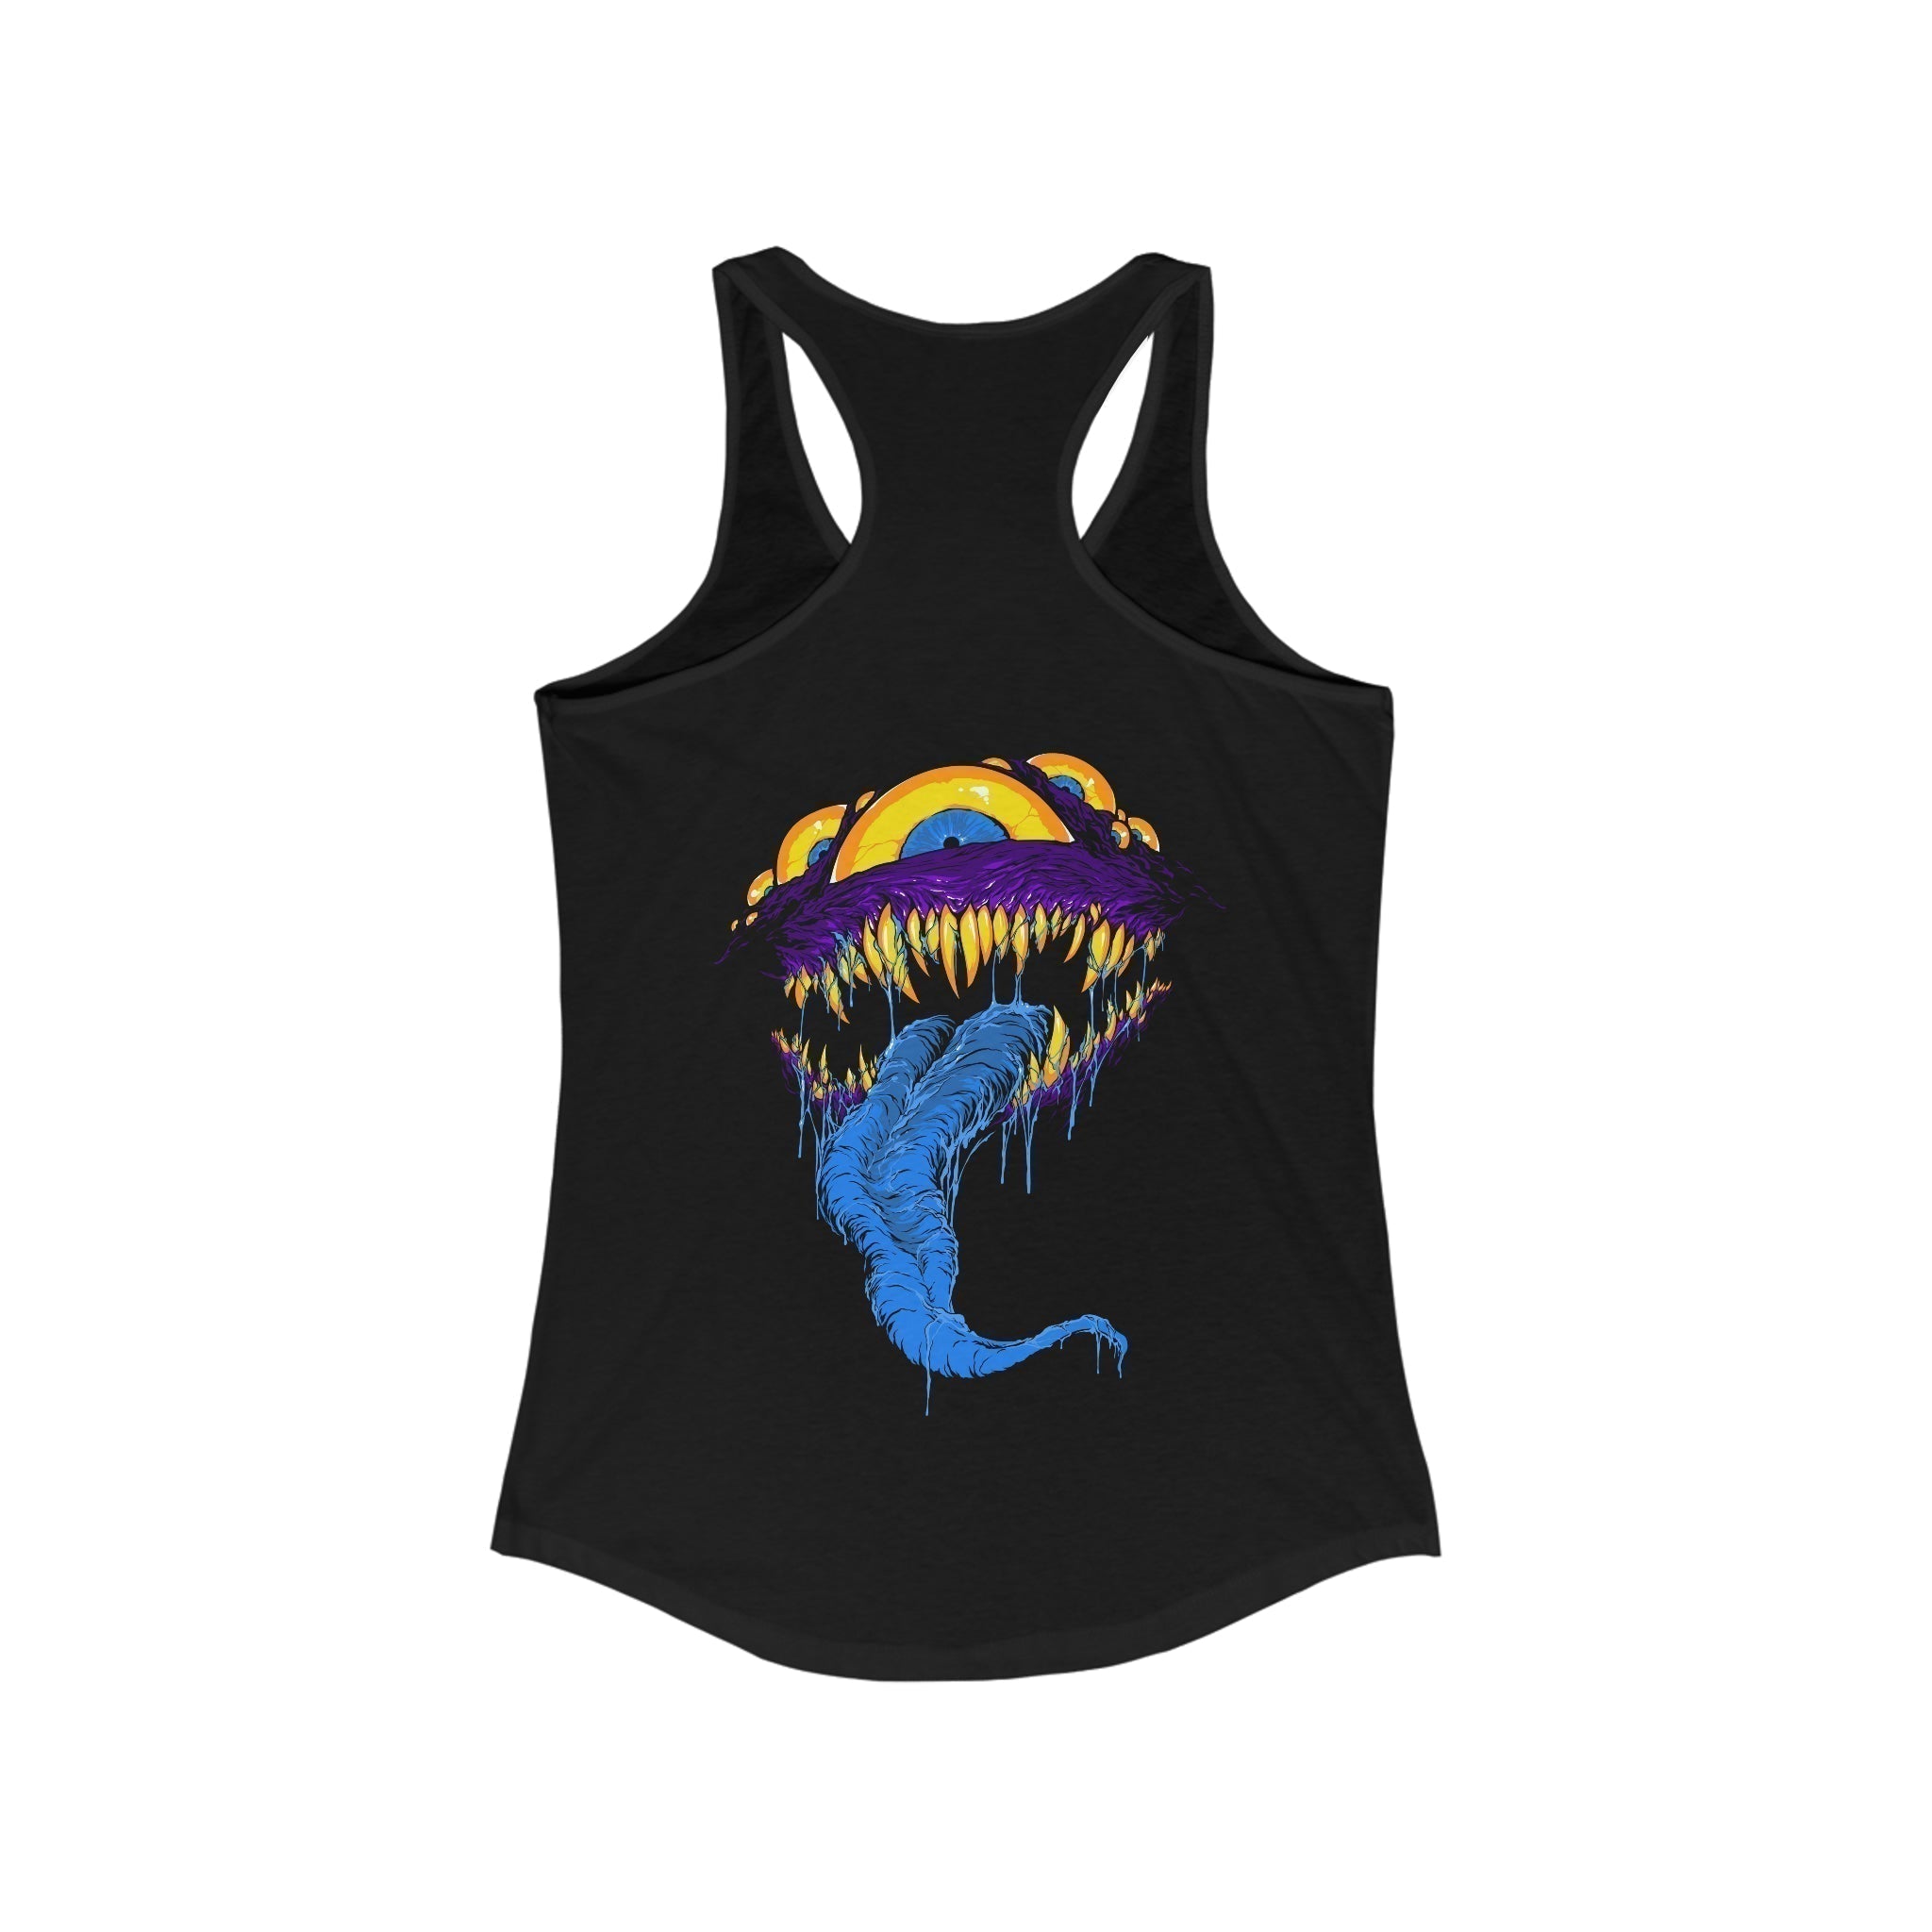 Mimic - Norse Foundry Women's Tank Top - 74689195917557471544